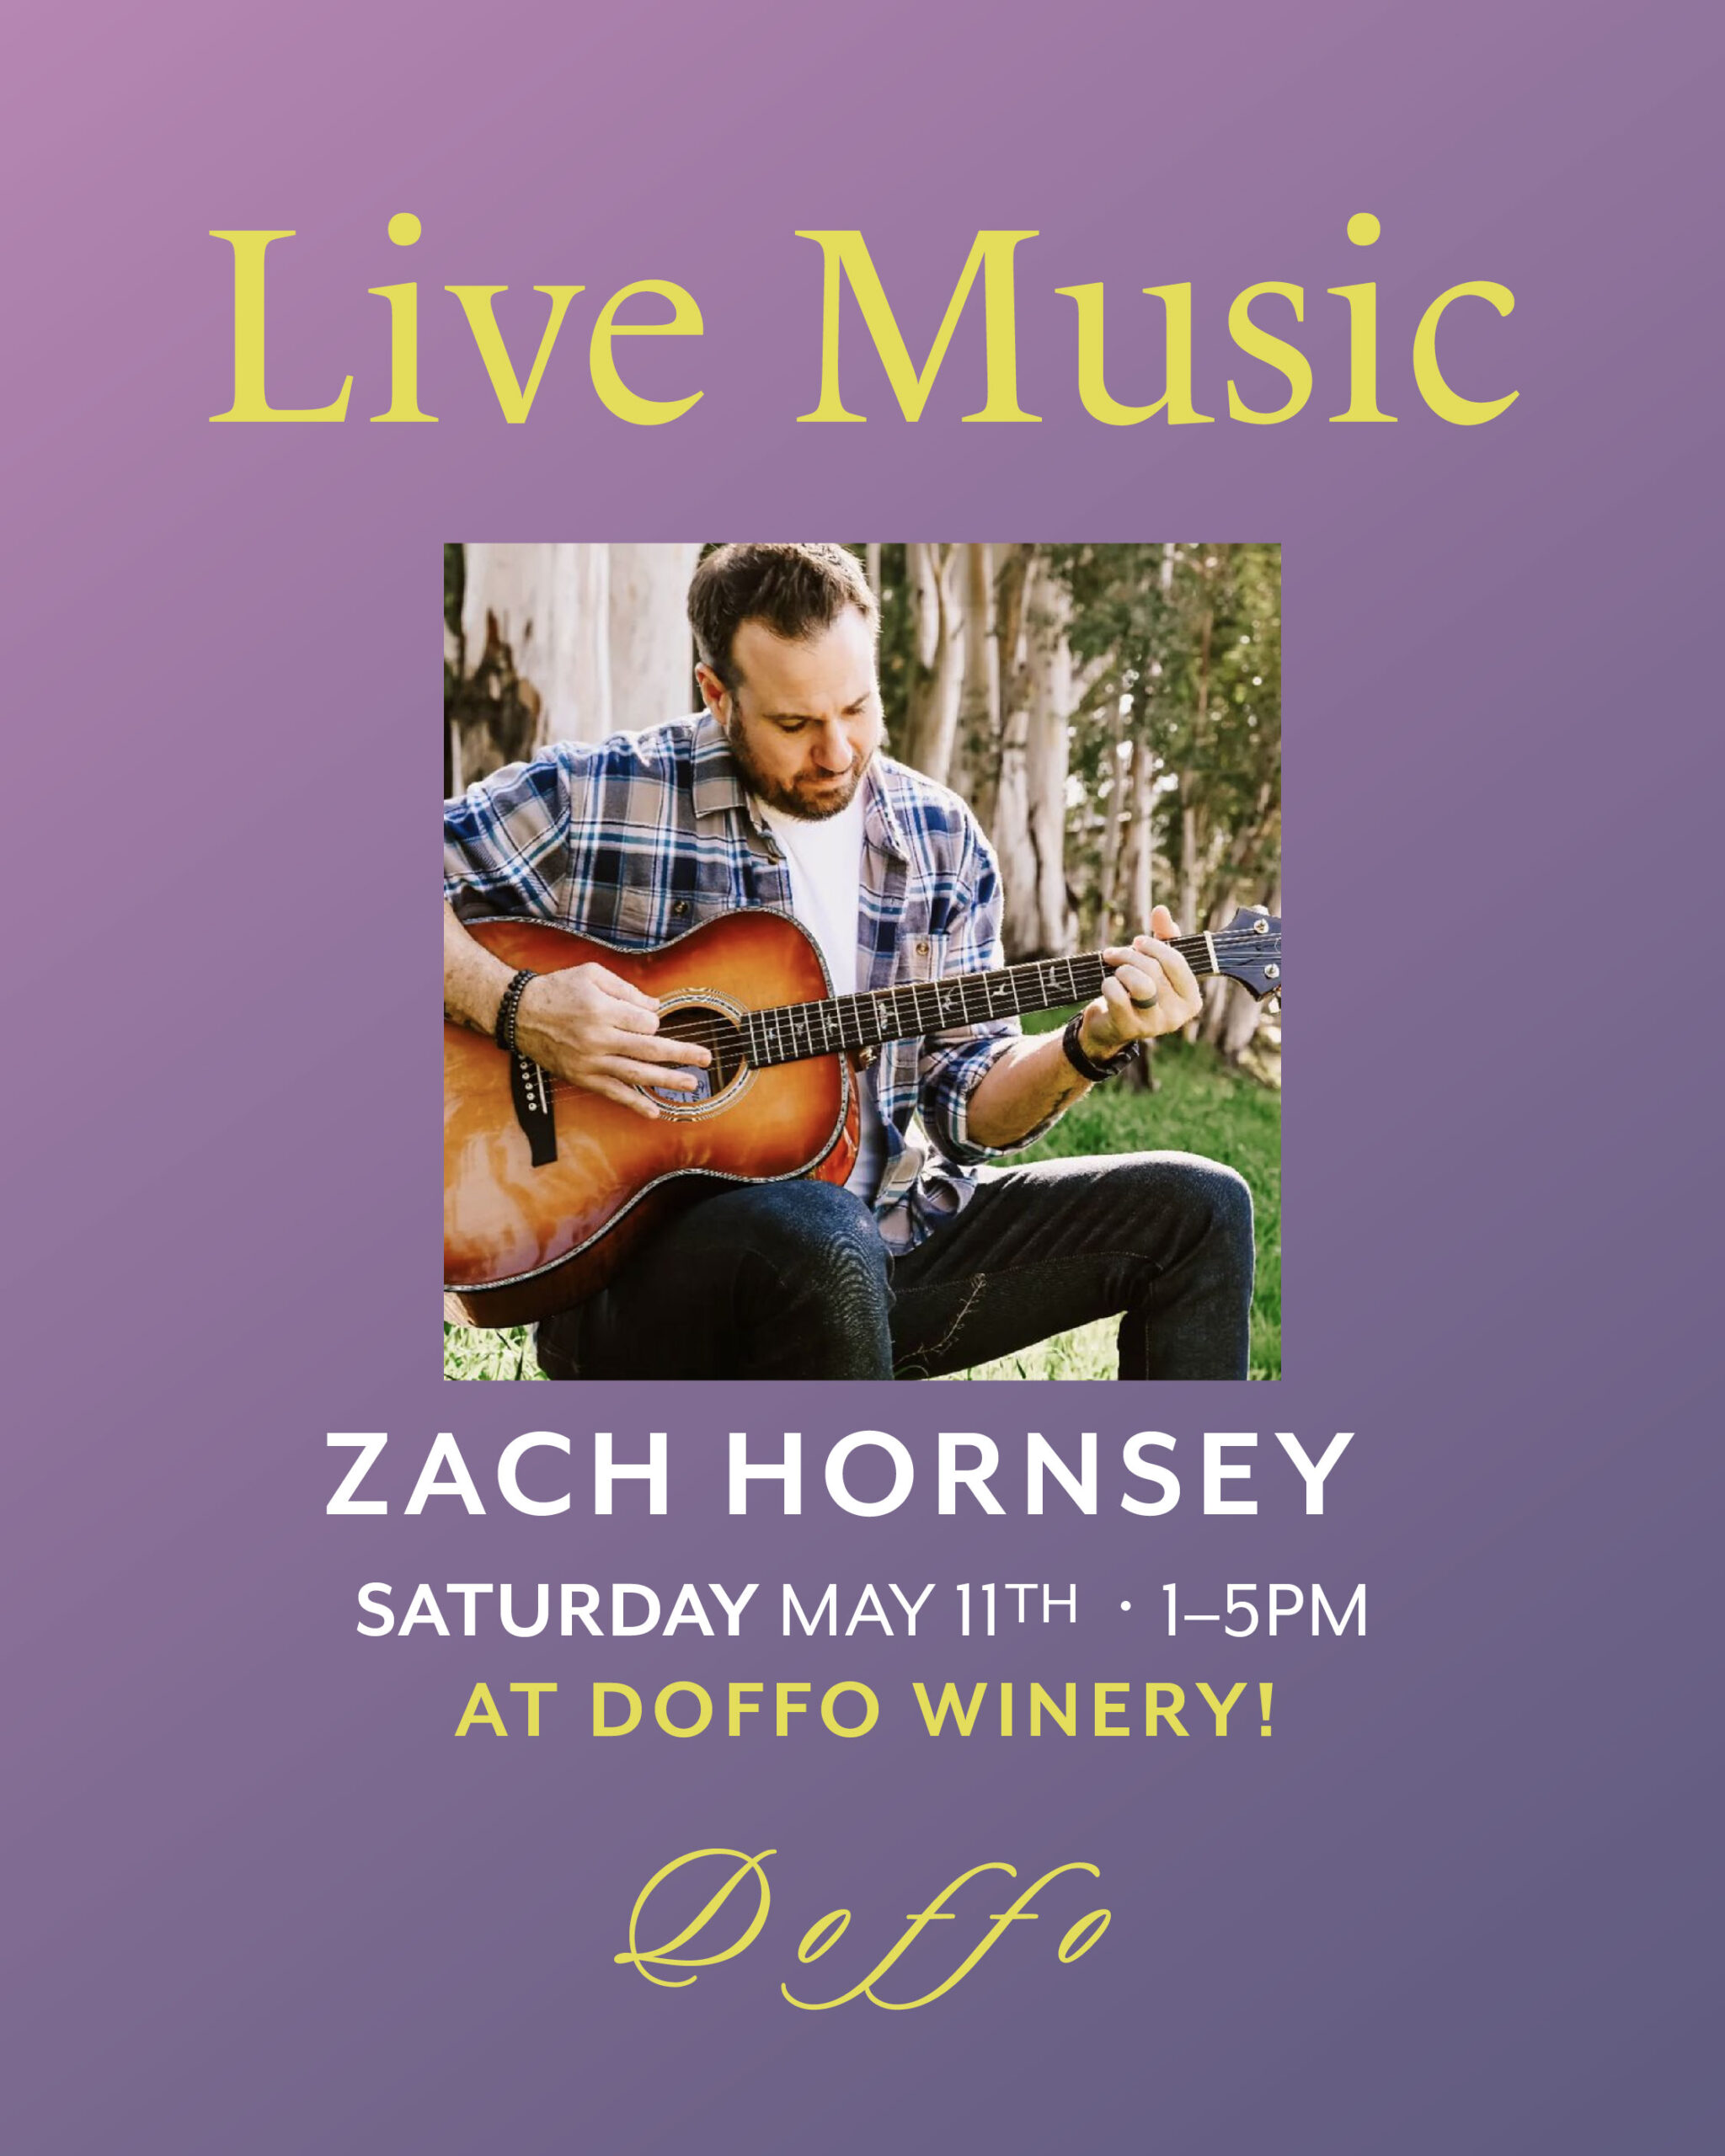 Live Music at the Doffo Winery | Zach Hornsey